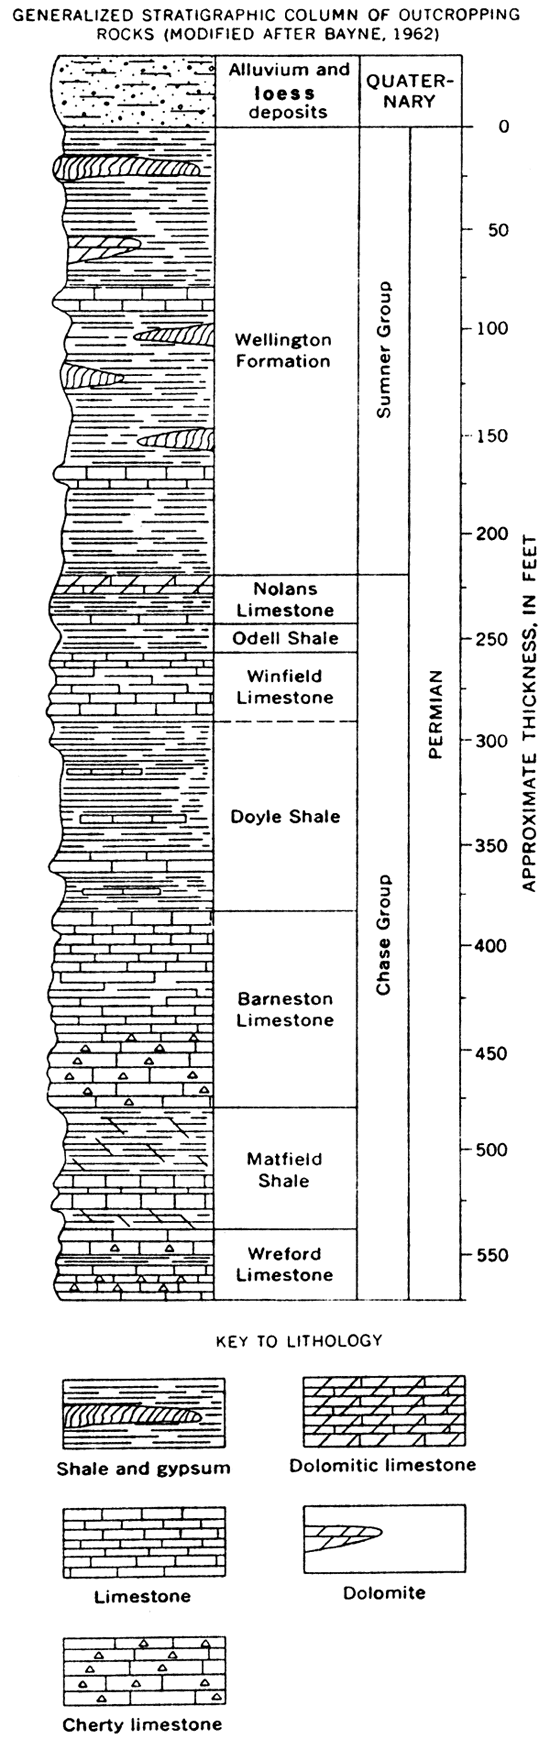 Generalized stratigraphic column of Chase and Sumner group rocks; from base, Wreford Ls, Matfield Sh, Barneston Ls, Doyle Sh, Winfield Ls, Odell Sh, Noland Ls, and Willington Fm.